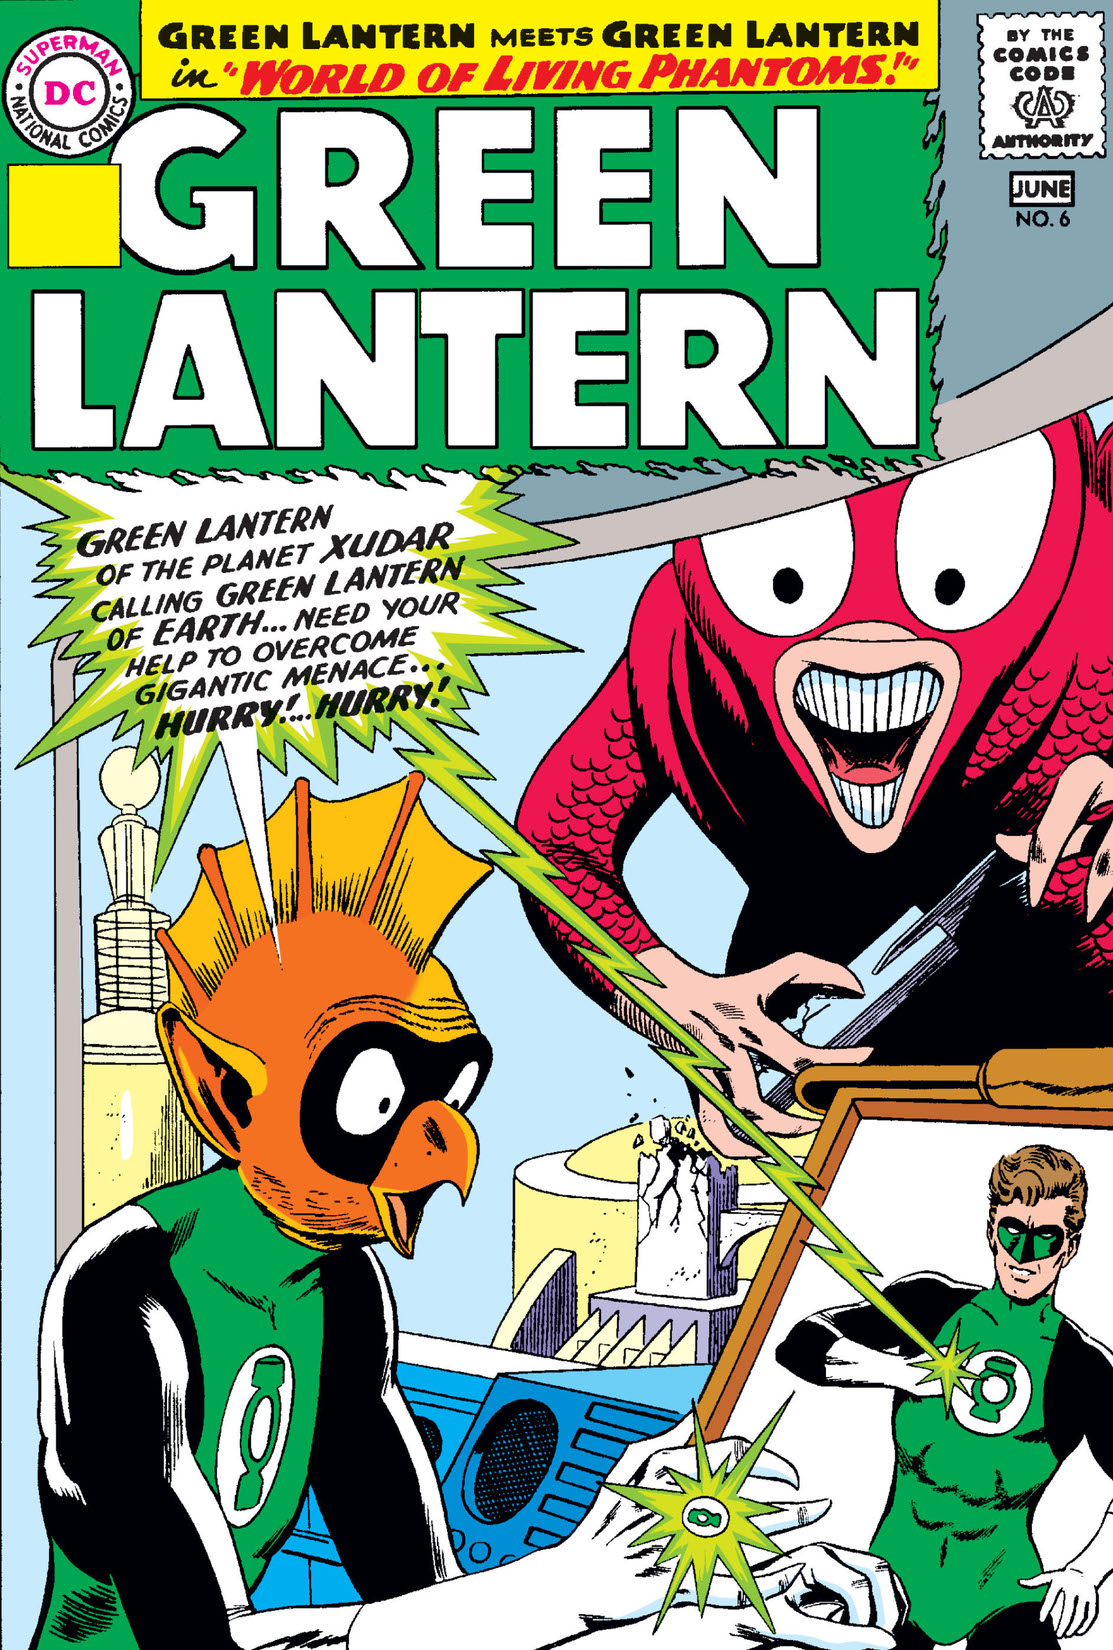 Green Lantern (1960-) #6 preview images